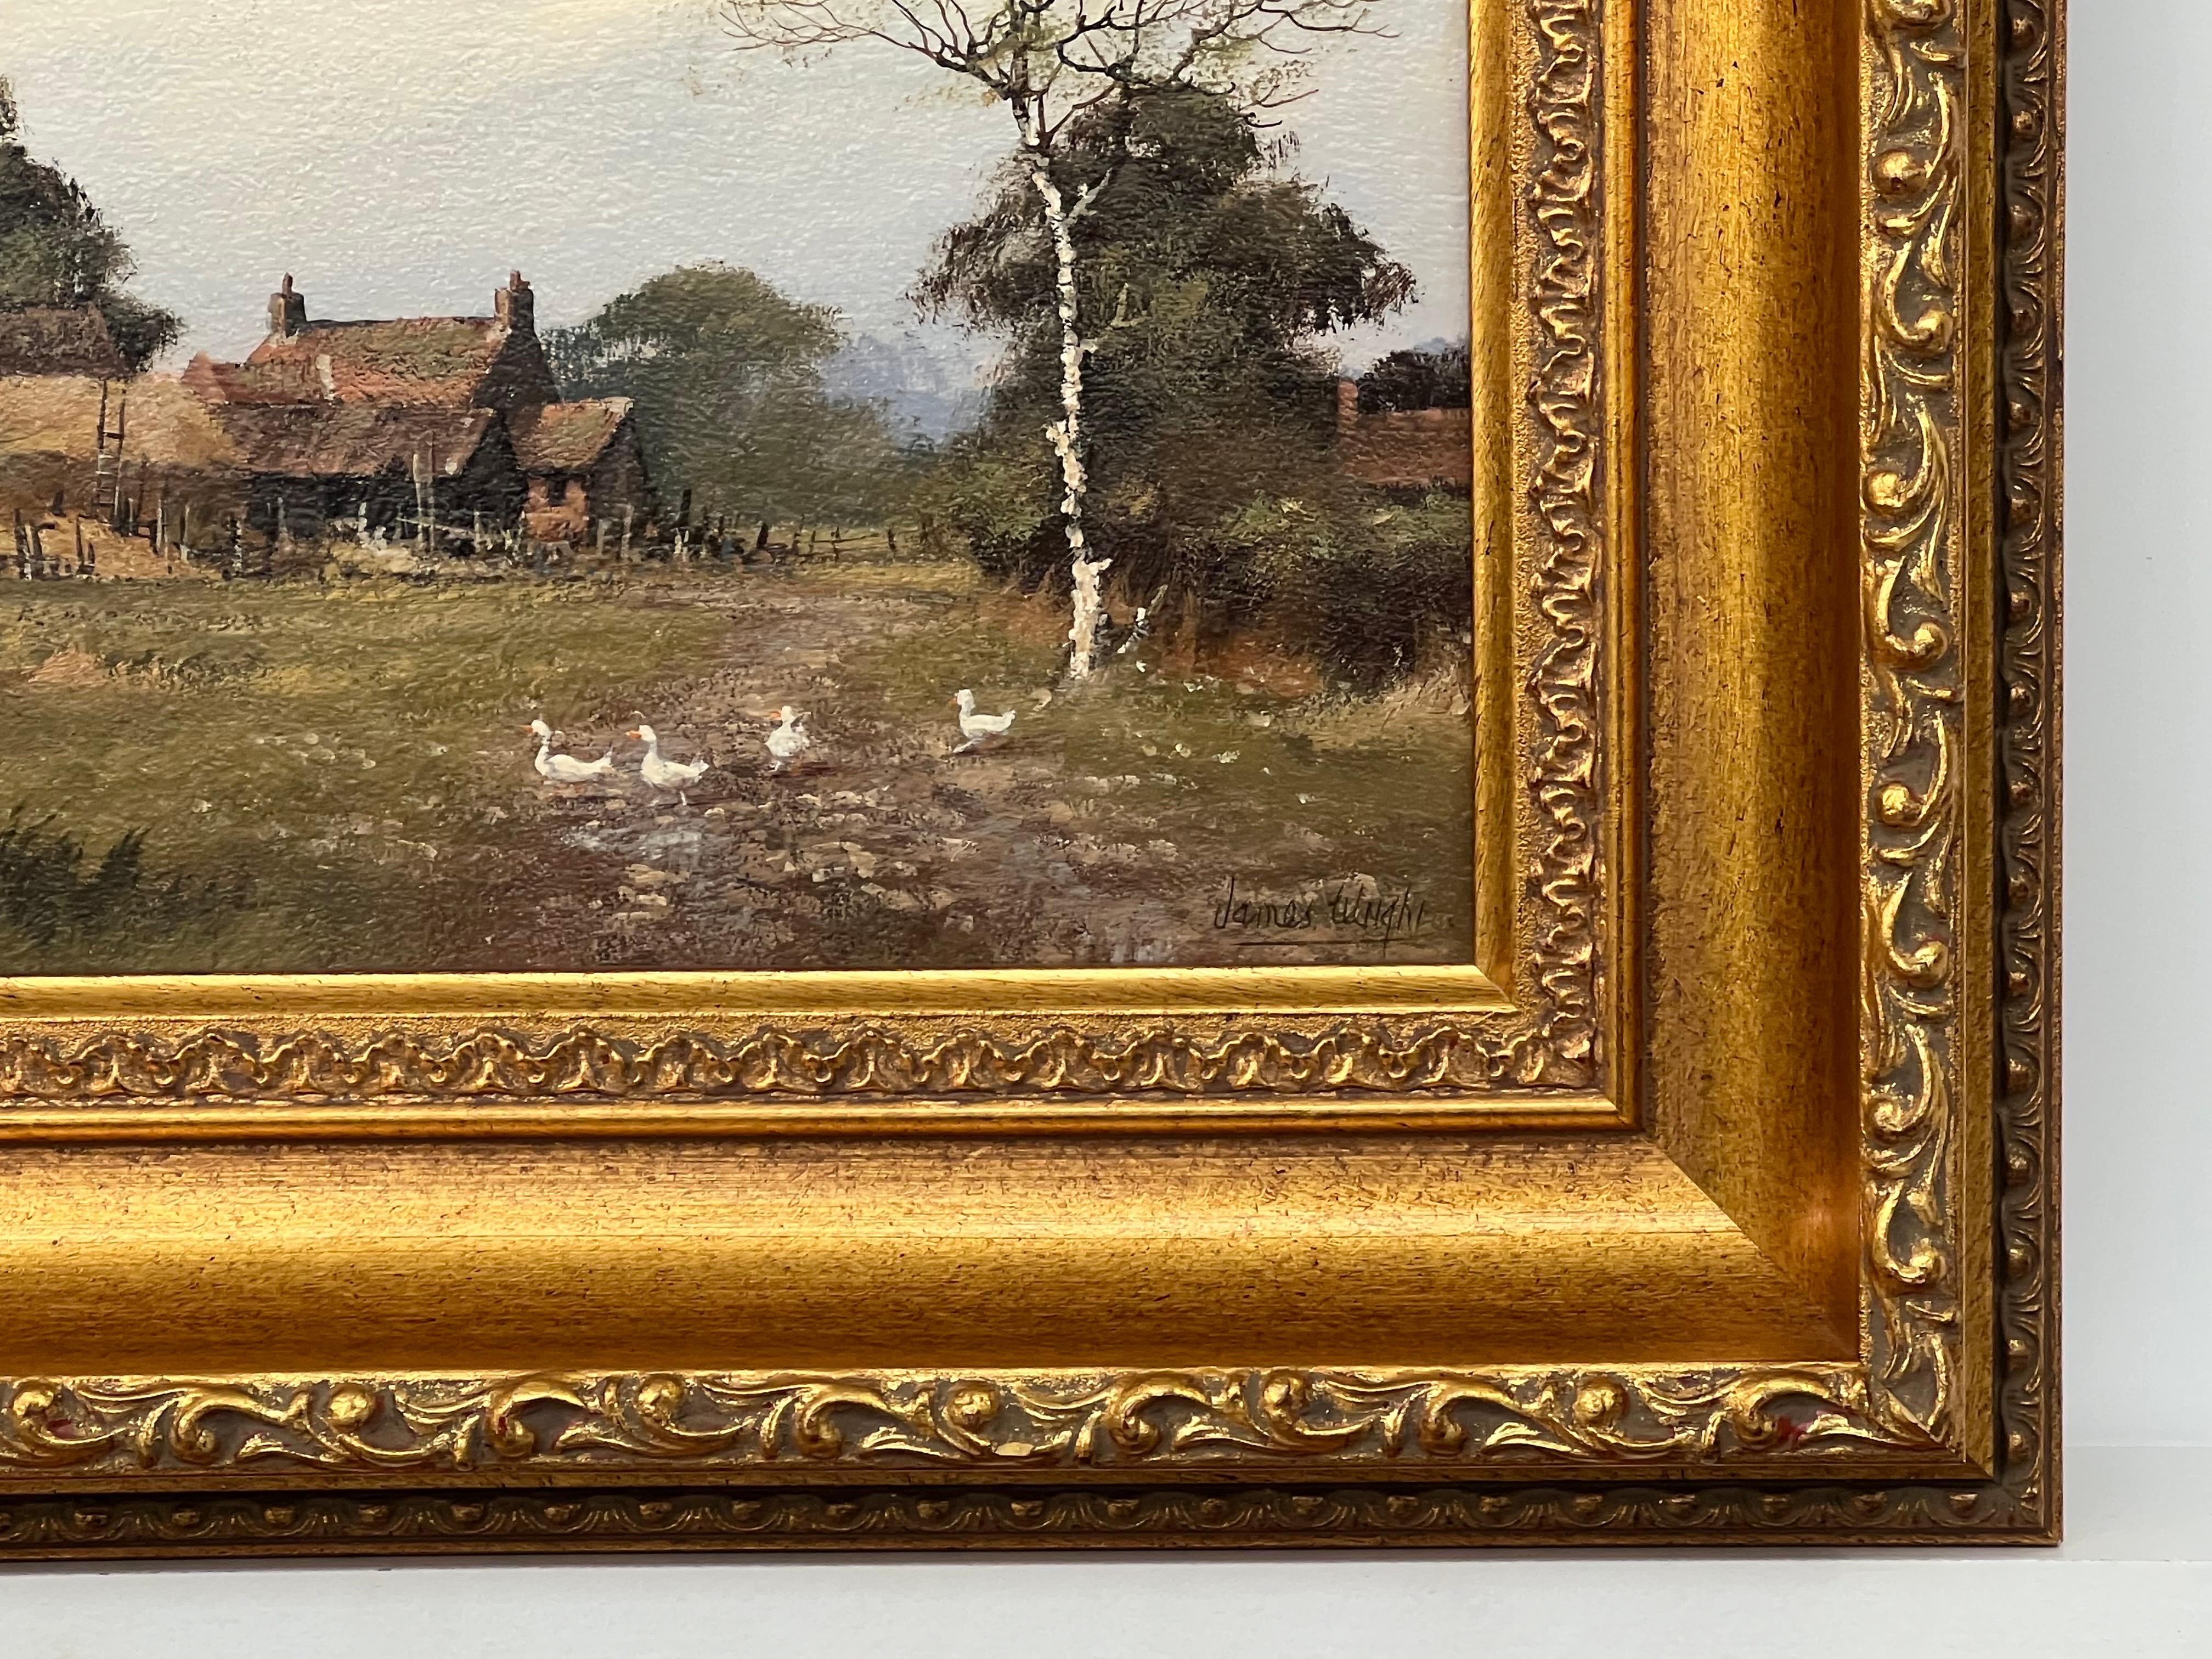 Painting of Farm with Geese in the English Countryside by 20th Century British Artist, James Wright 
Signed, Original, Oil on Canvas, housed in a beautiful ornate gold frame. 
Provenance: Part of the English Heritage Series No.110

Art measures 10 x